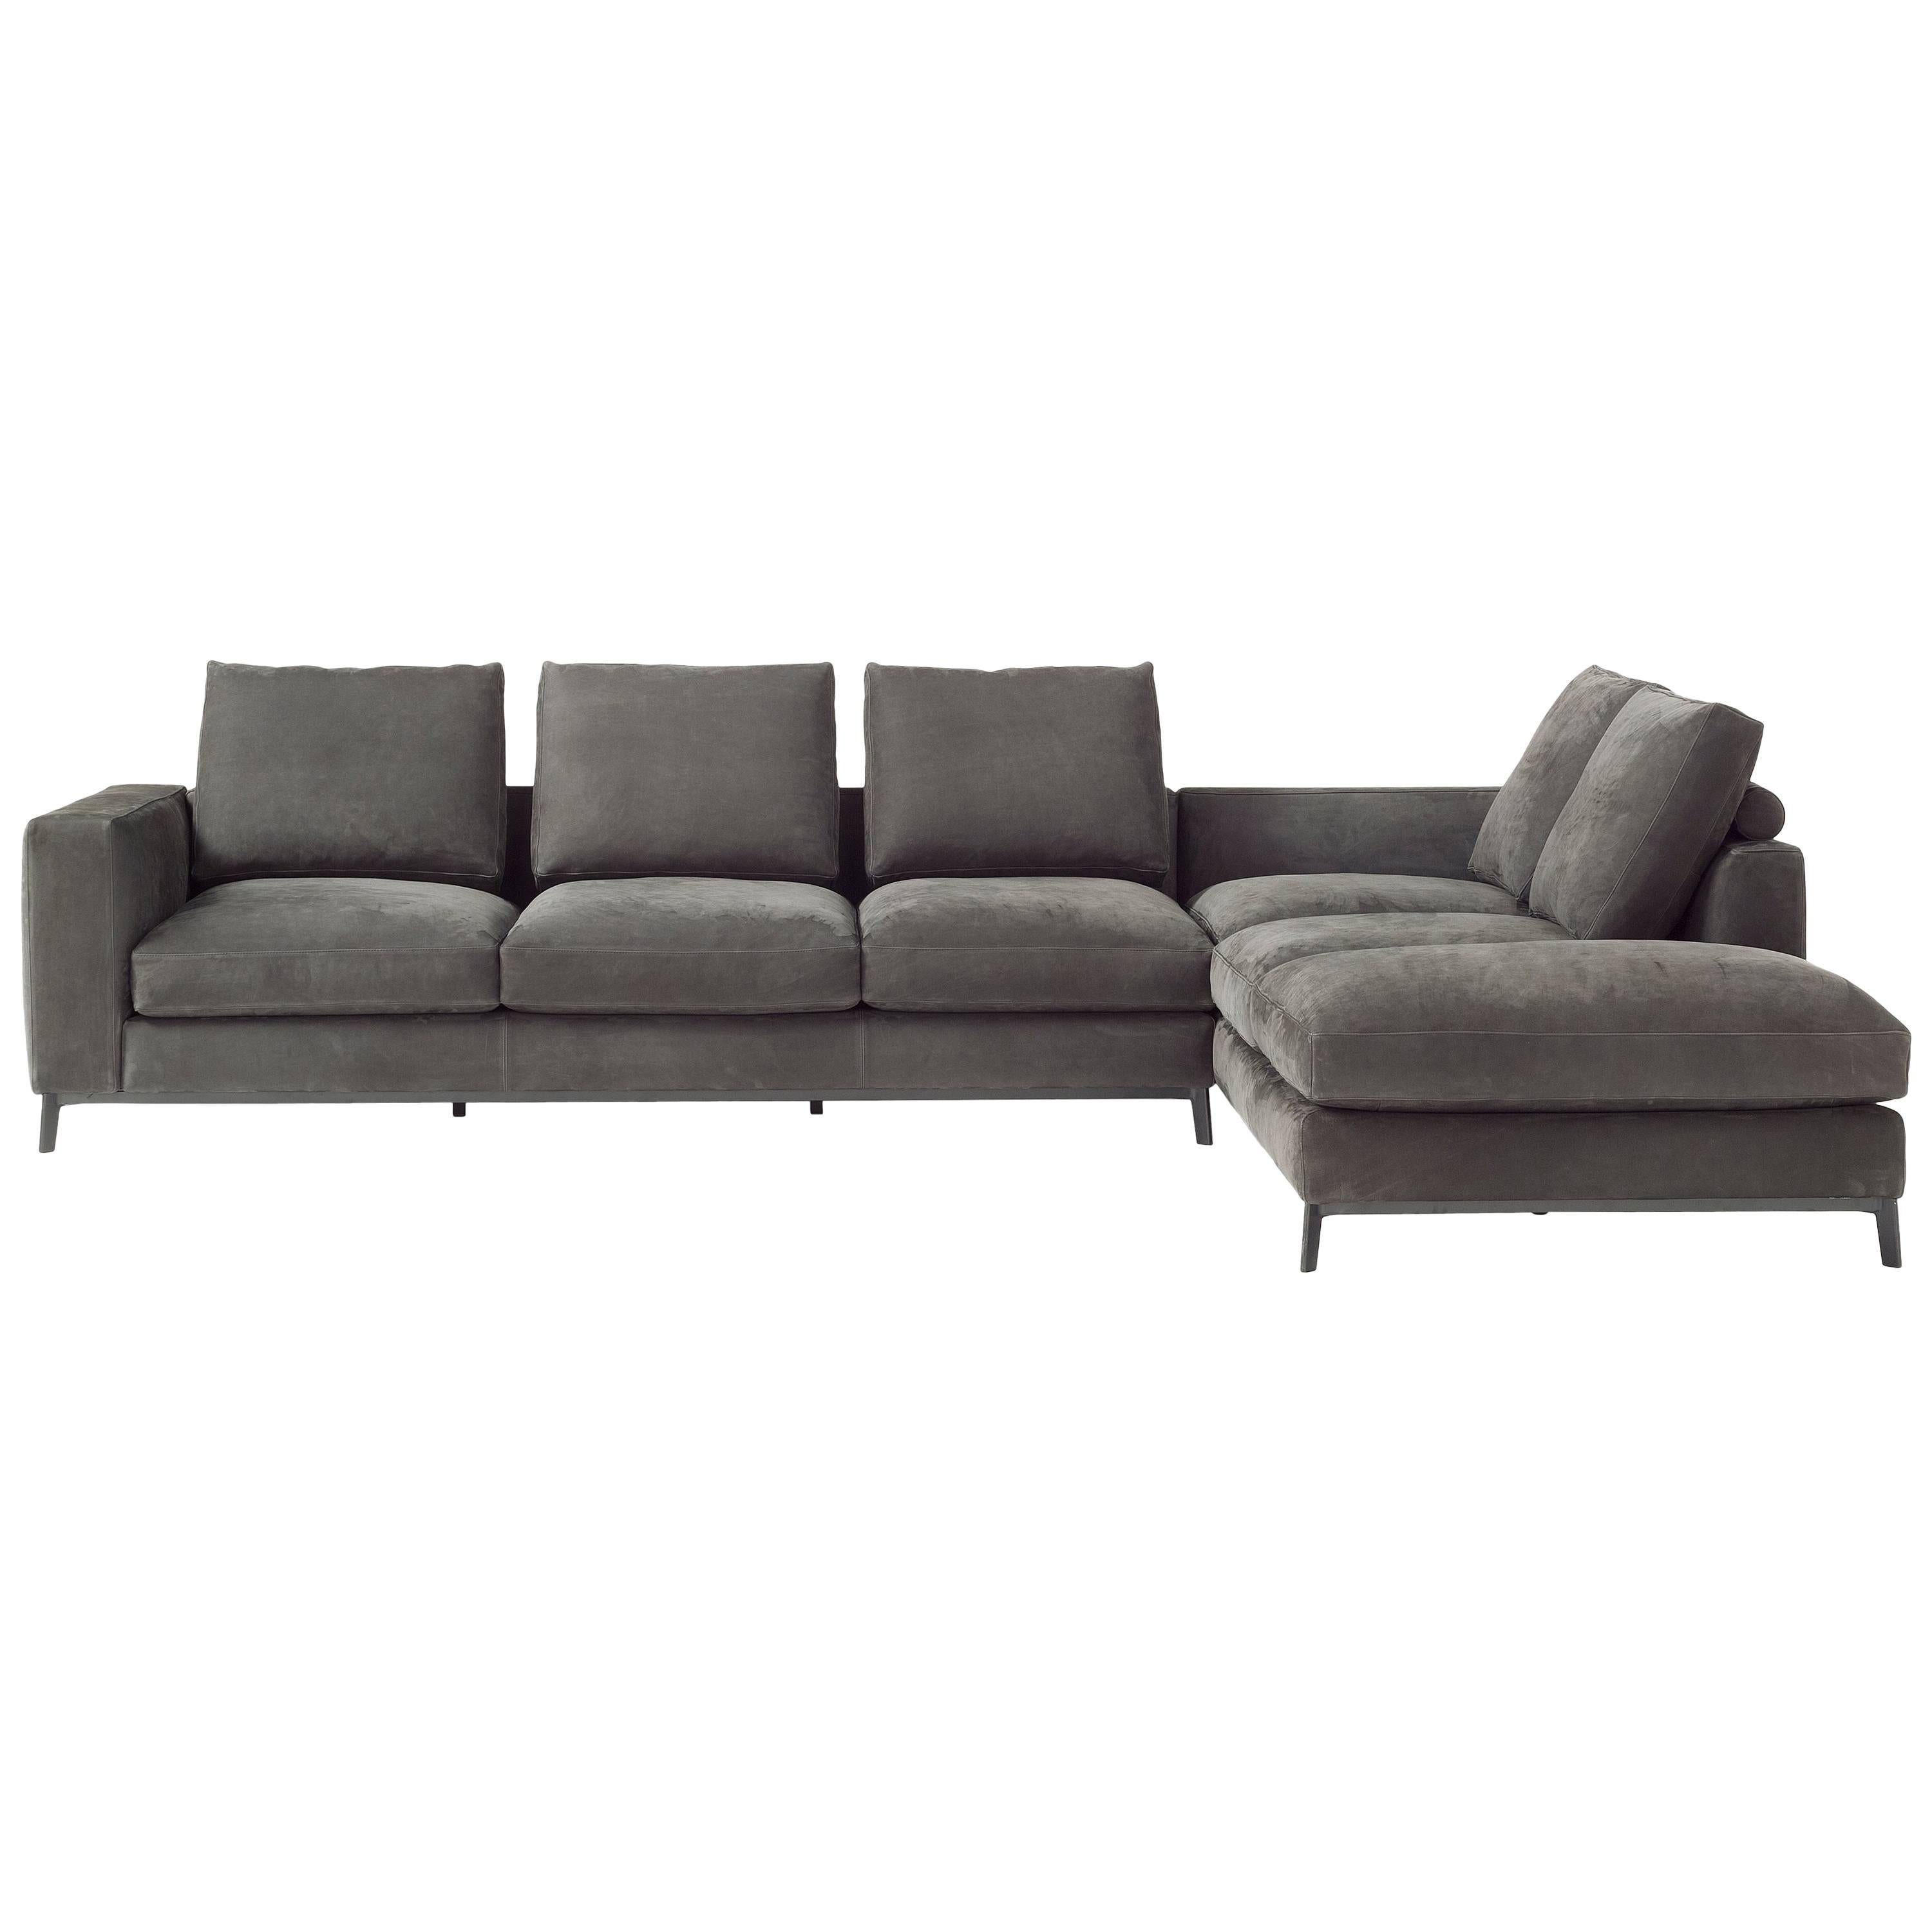 Dorsey Composition Sofa in Charcoal Gray by Amura Lab For Sale